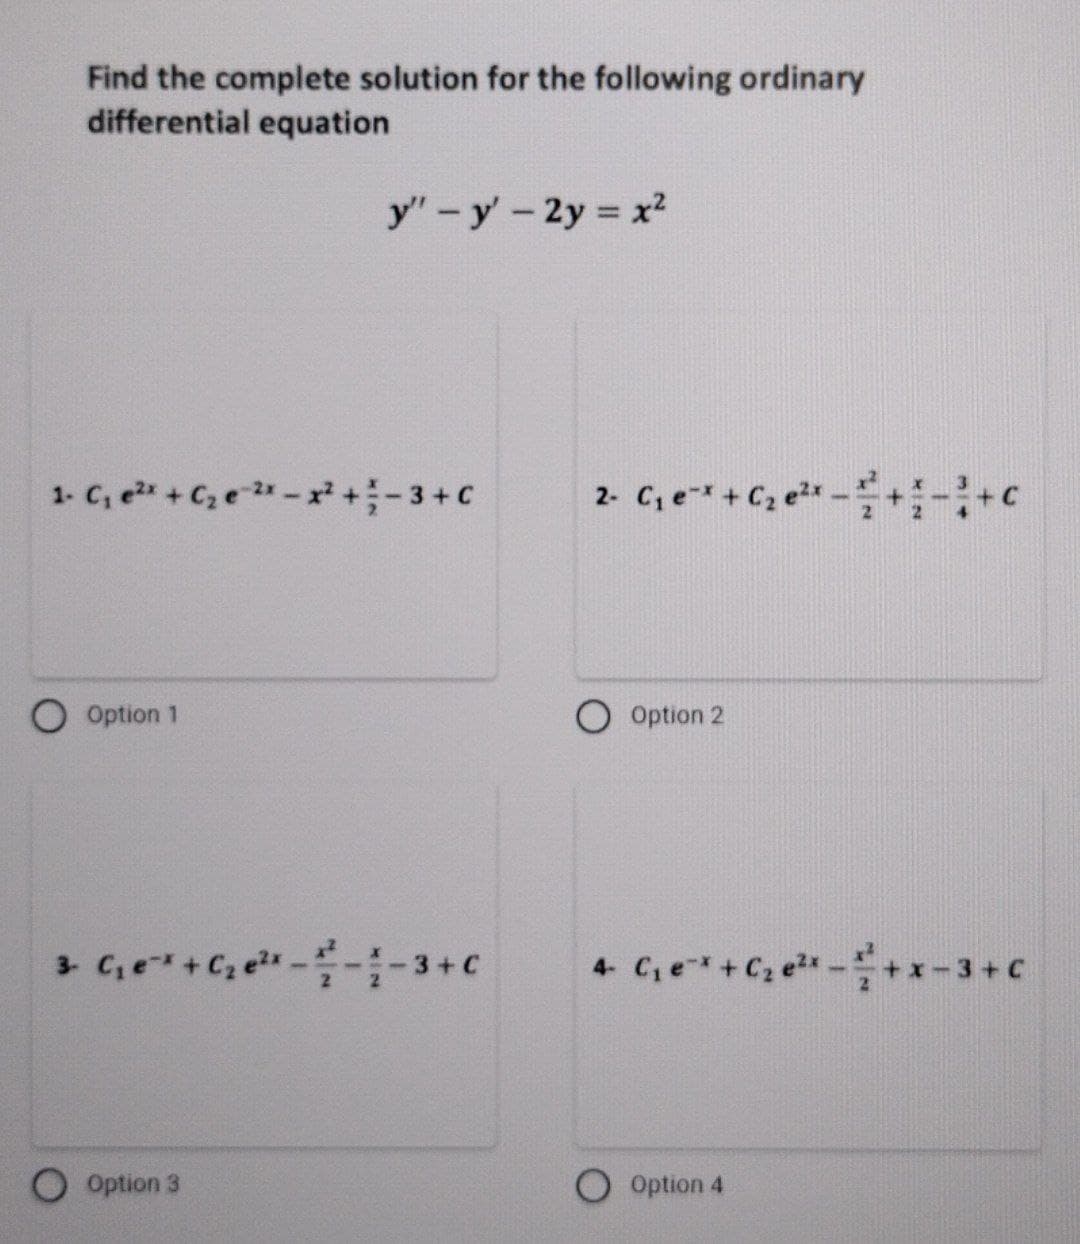 Find the complete solution for the following ordinary
differential equation
1- C₁ e²x + C₂ e ²x - x² + 3 +C
Option 1
y" - y - 2y = x²
3 C₁ e¹¹ +₂e²¹¹----3+C
Option 3
2- C₁ e-x + C₂ e²x -+-+C
Option 2
4 C₁e²x + C₂ e²x - ²+x-3+C
Option 4